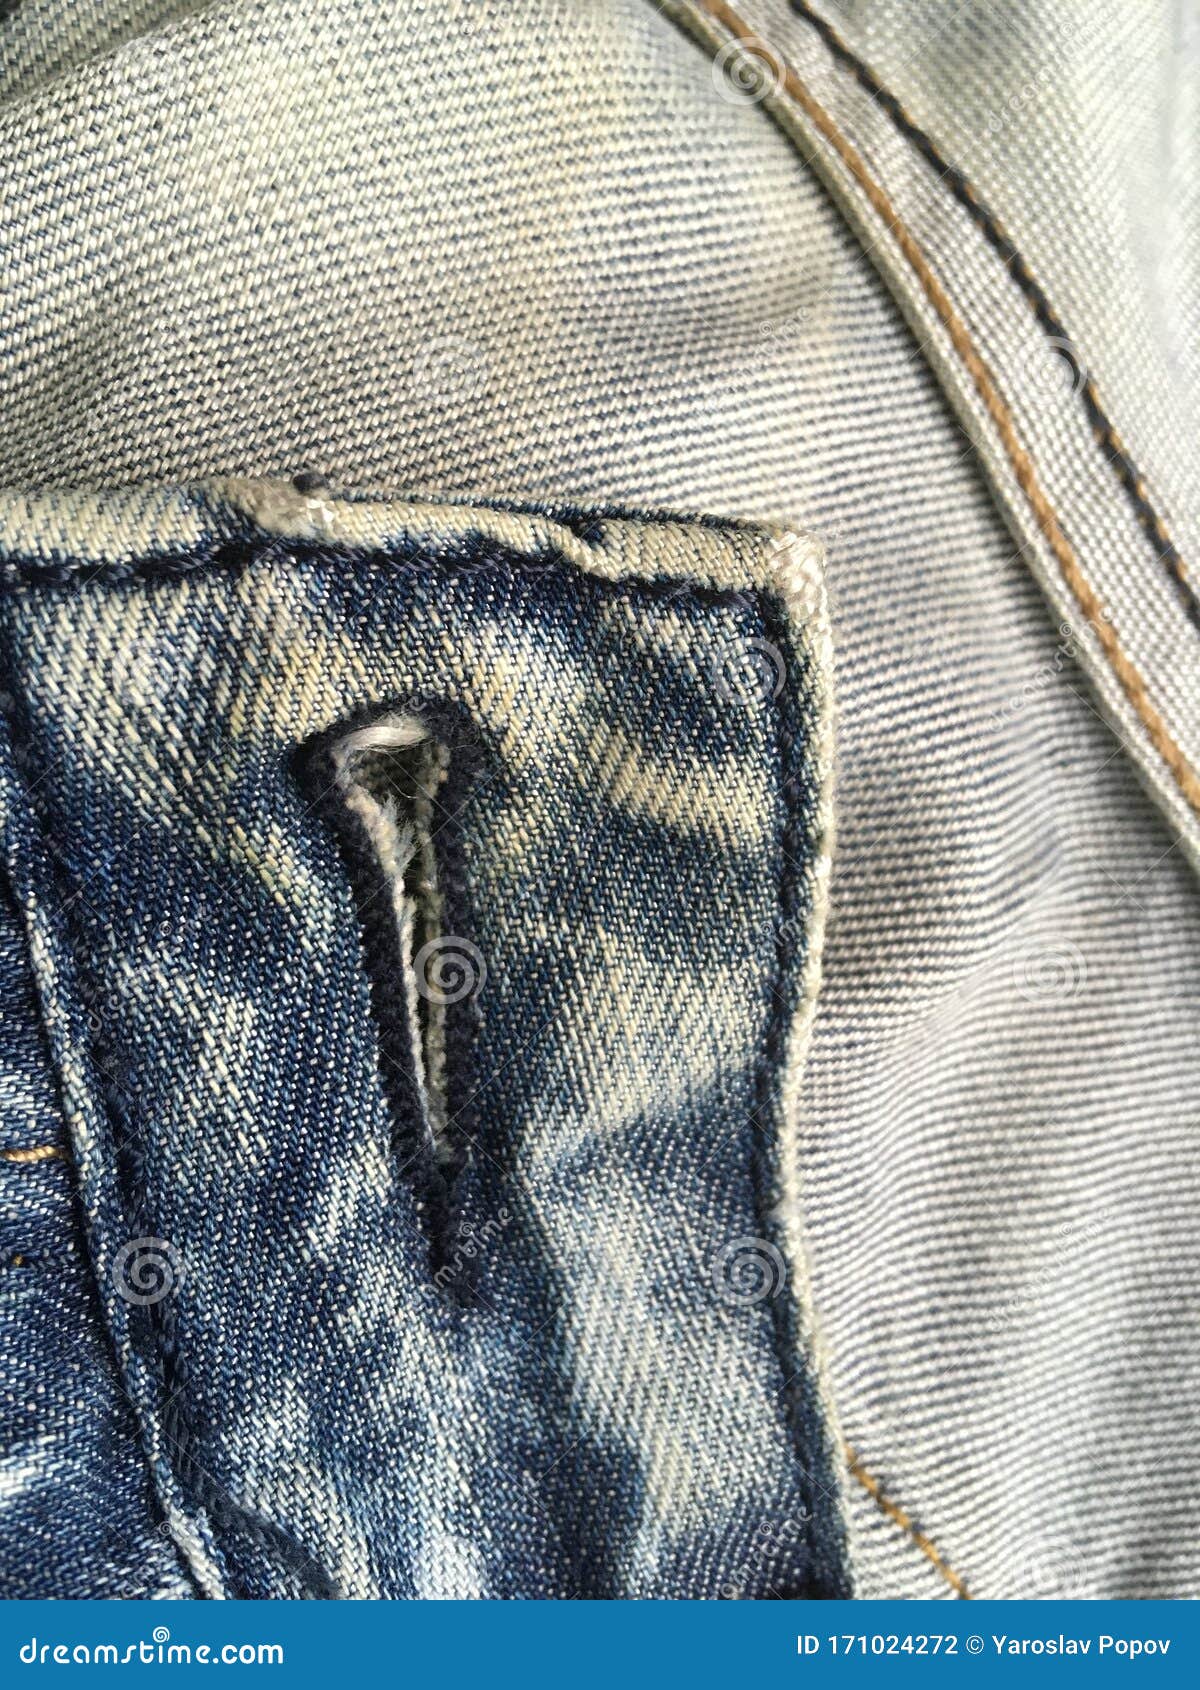 Vintage Blue Boiled Jeans. Abstract Macro Shot Stock Photo - Image of ...